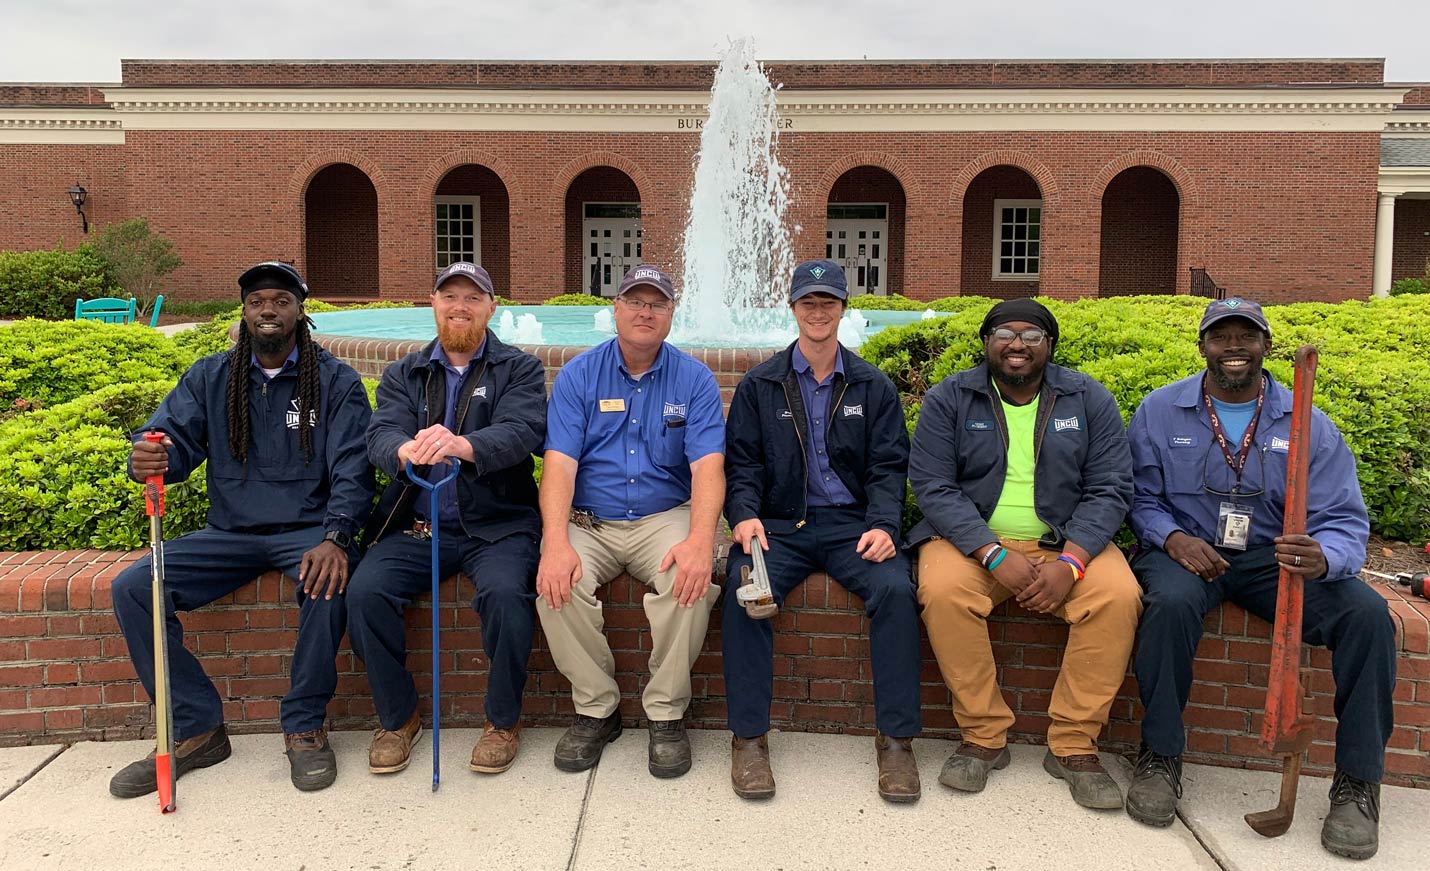 UNCW plumber team sitting in front of a fountain on campus